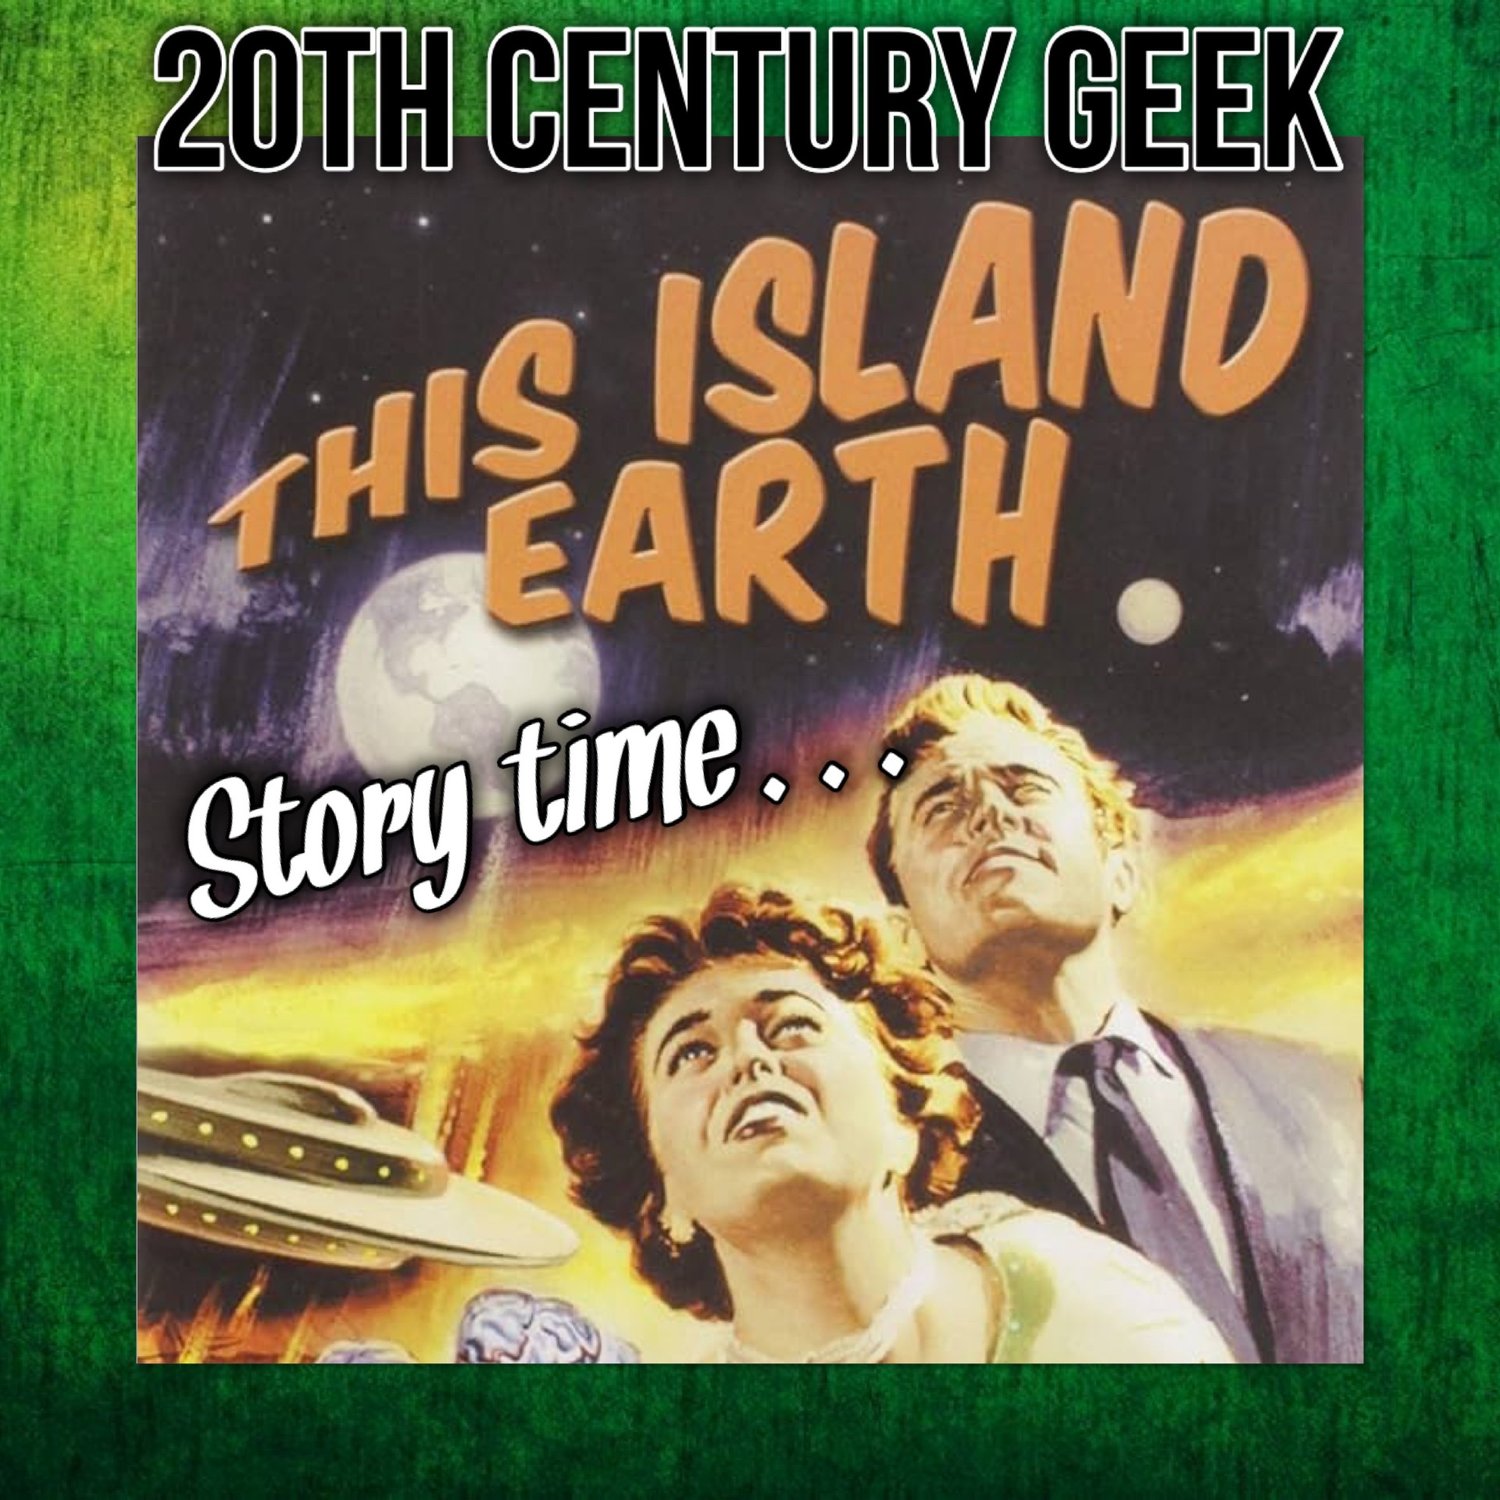 Episode 197 Story Time This Island Earth